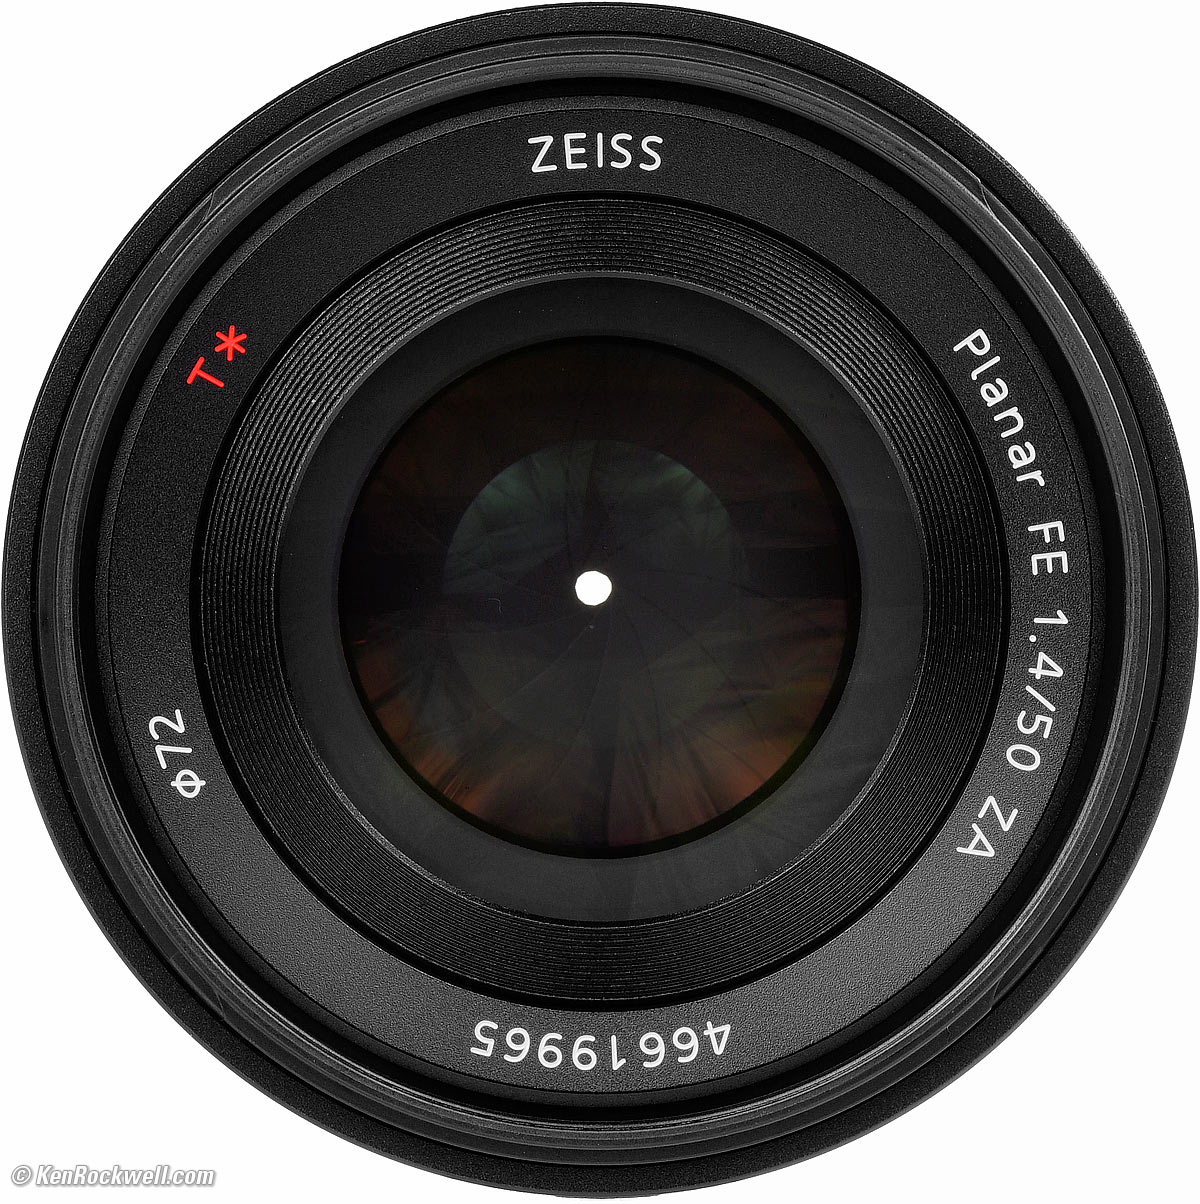 Sony Zeiss 50mm f/1.4 FE Review